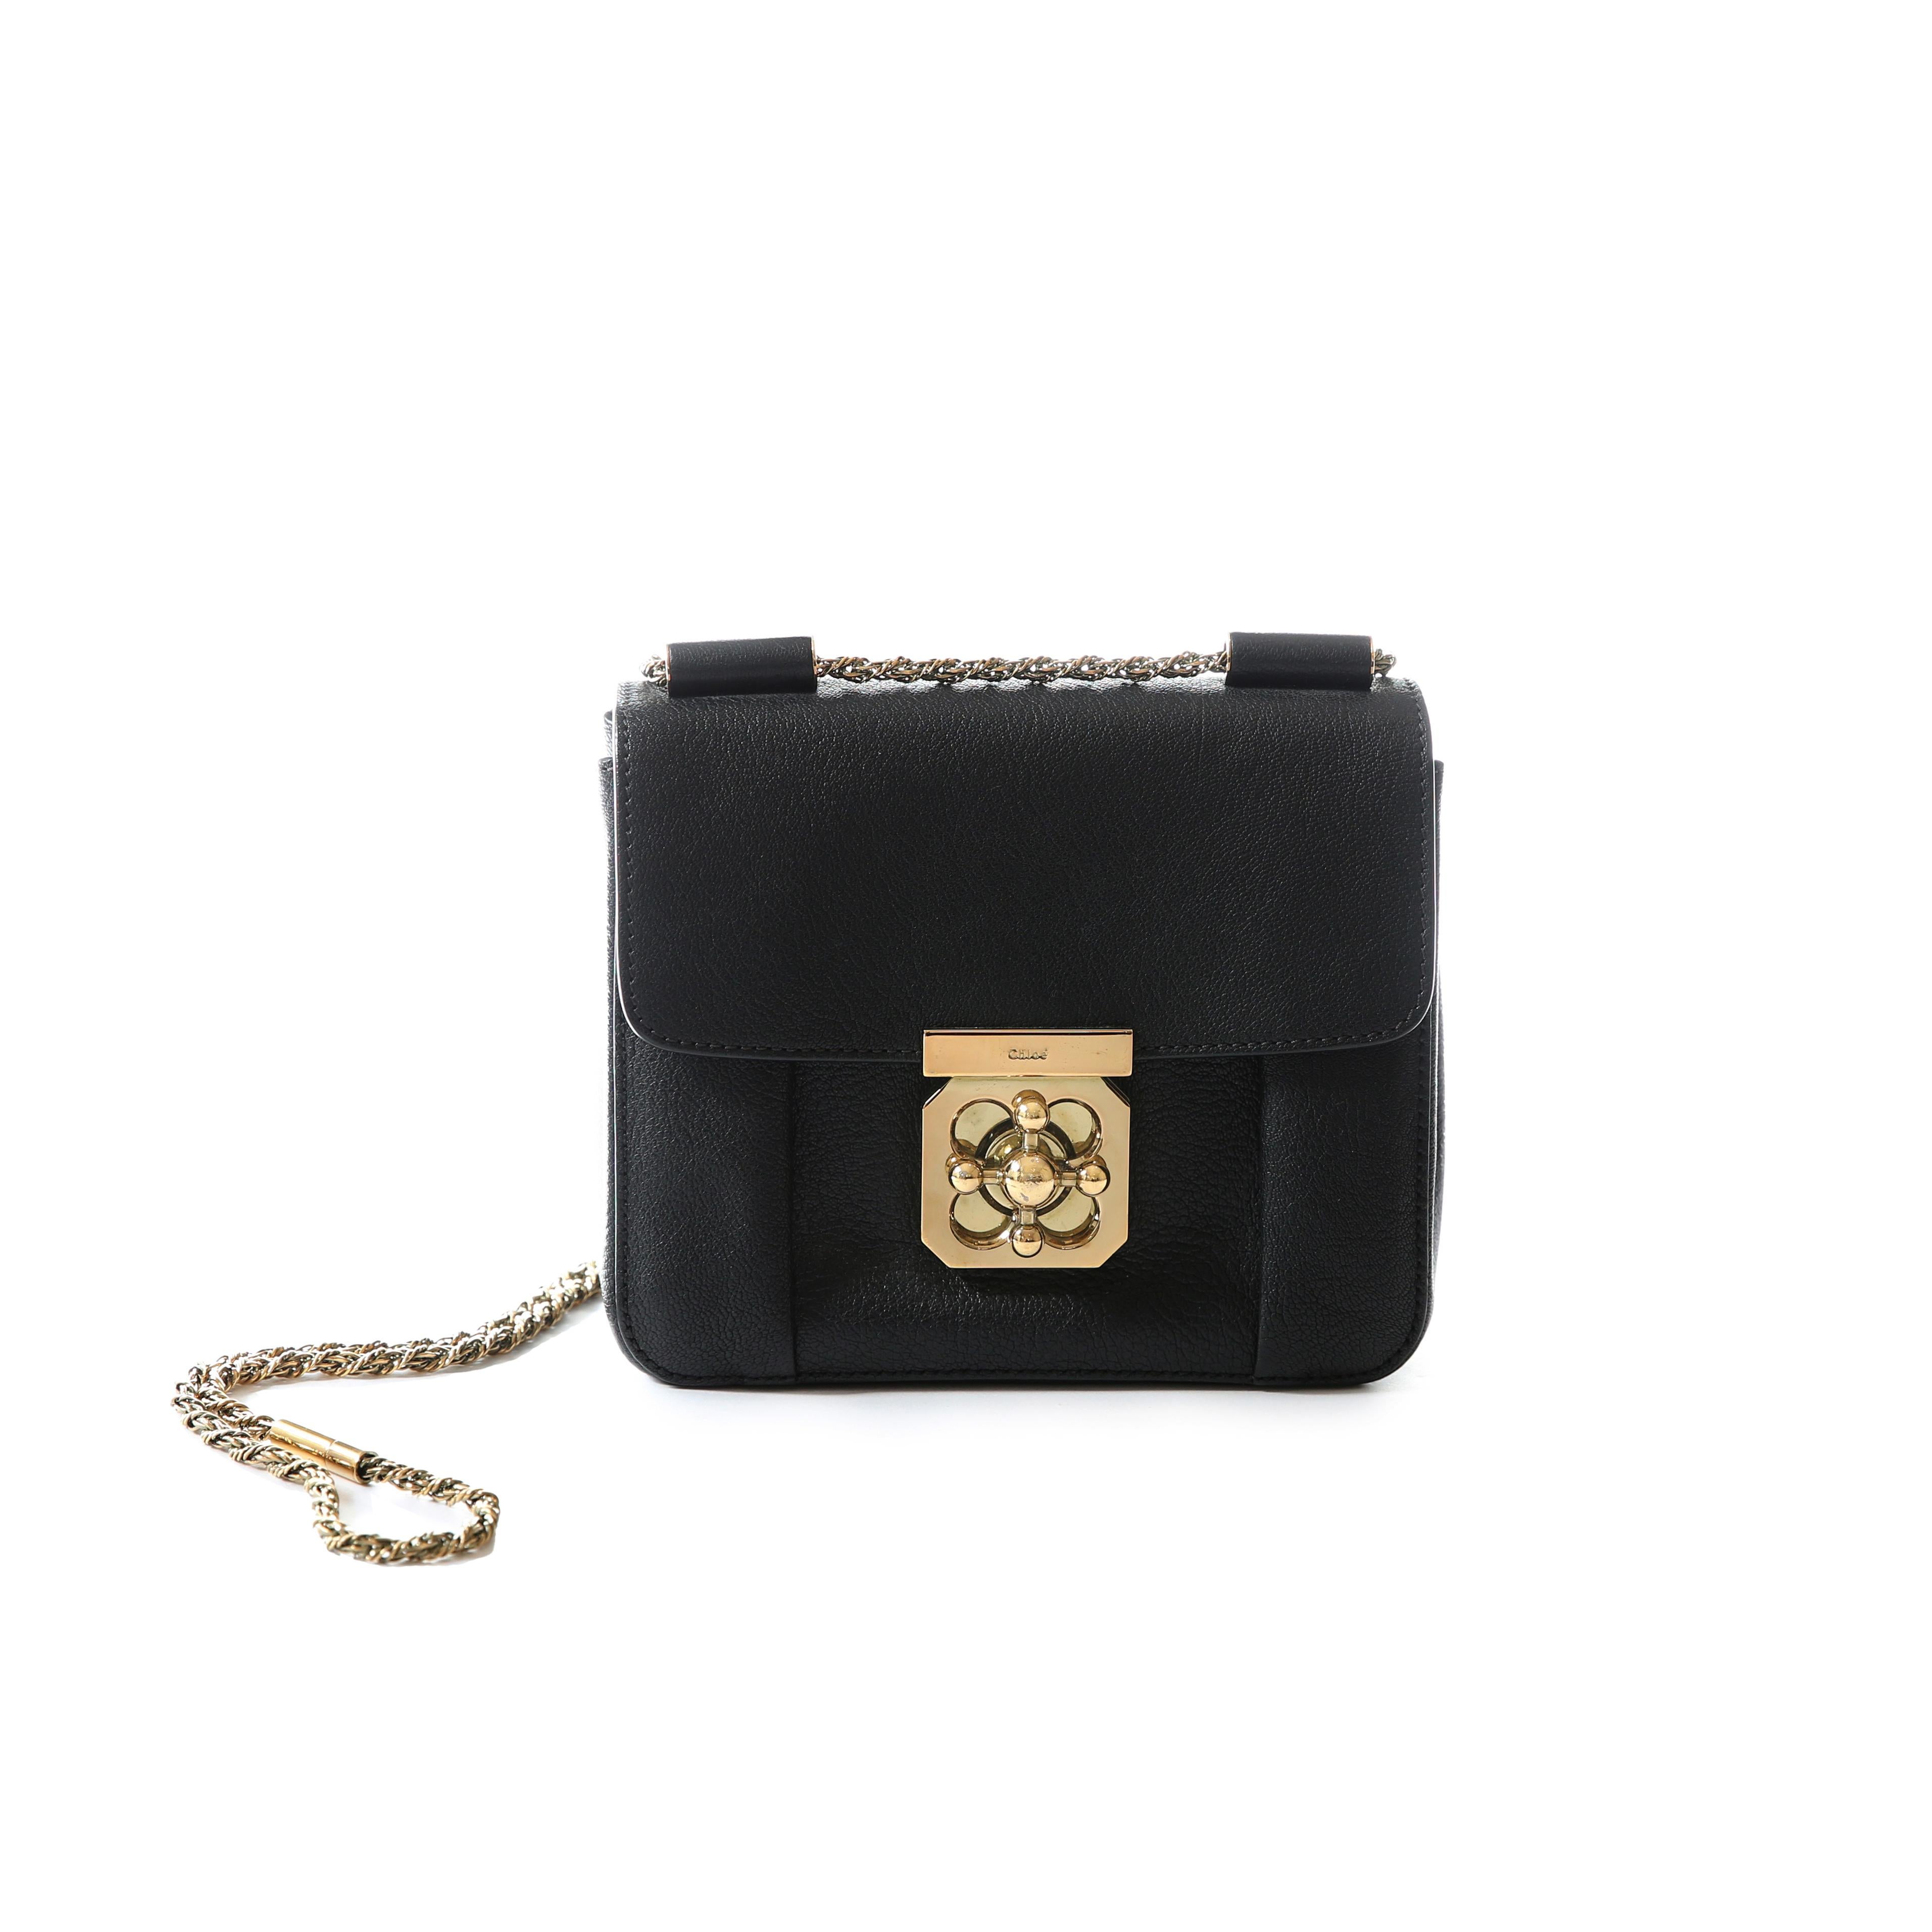 LOVE LALI Vintage

Chloe Elise bag in black
Grained leather
Long twisted gold chain shoulder strap - can be worn doubled or at full length or tucked inside the bag 
Gold twist dial closure
1 inside pocket

Condition:
Fine surface scratches to the